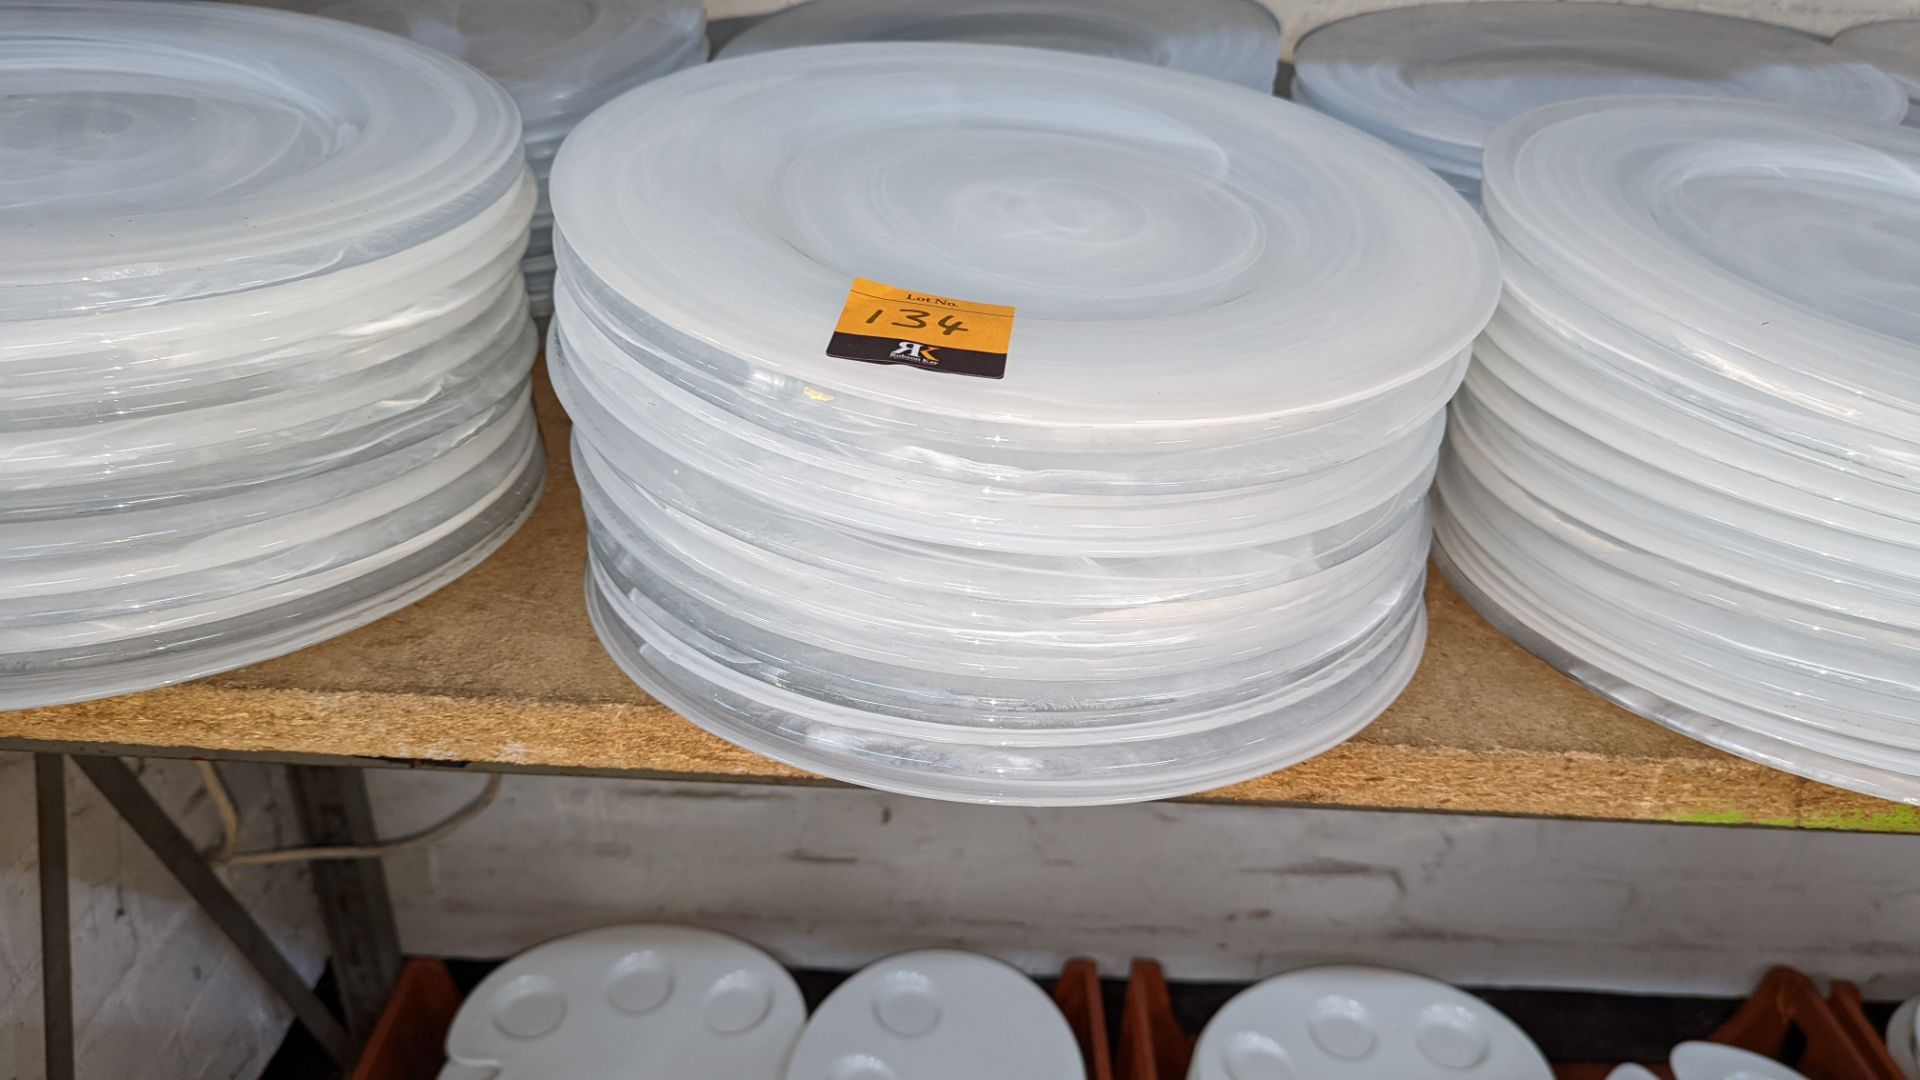 30 off large clear/white patterned glass plates, each measuring approximately 330mm diameter - Image 2 of 3